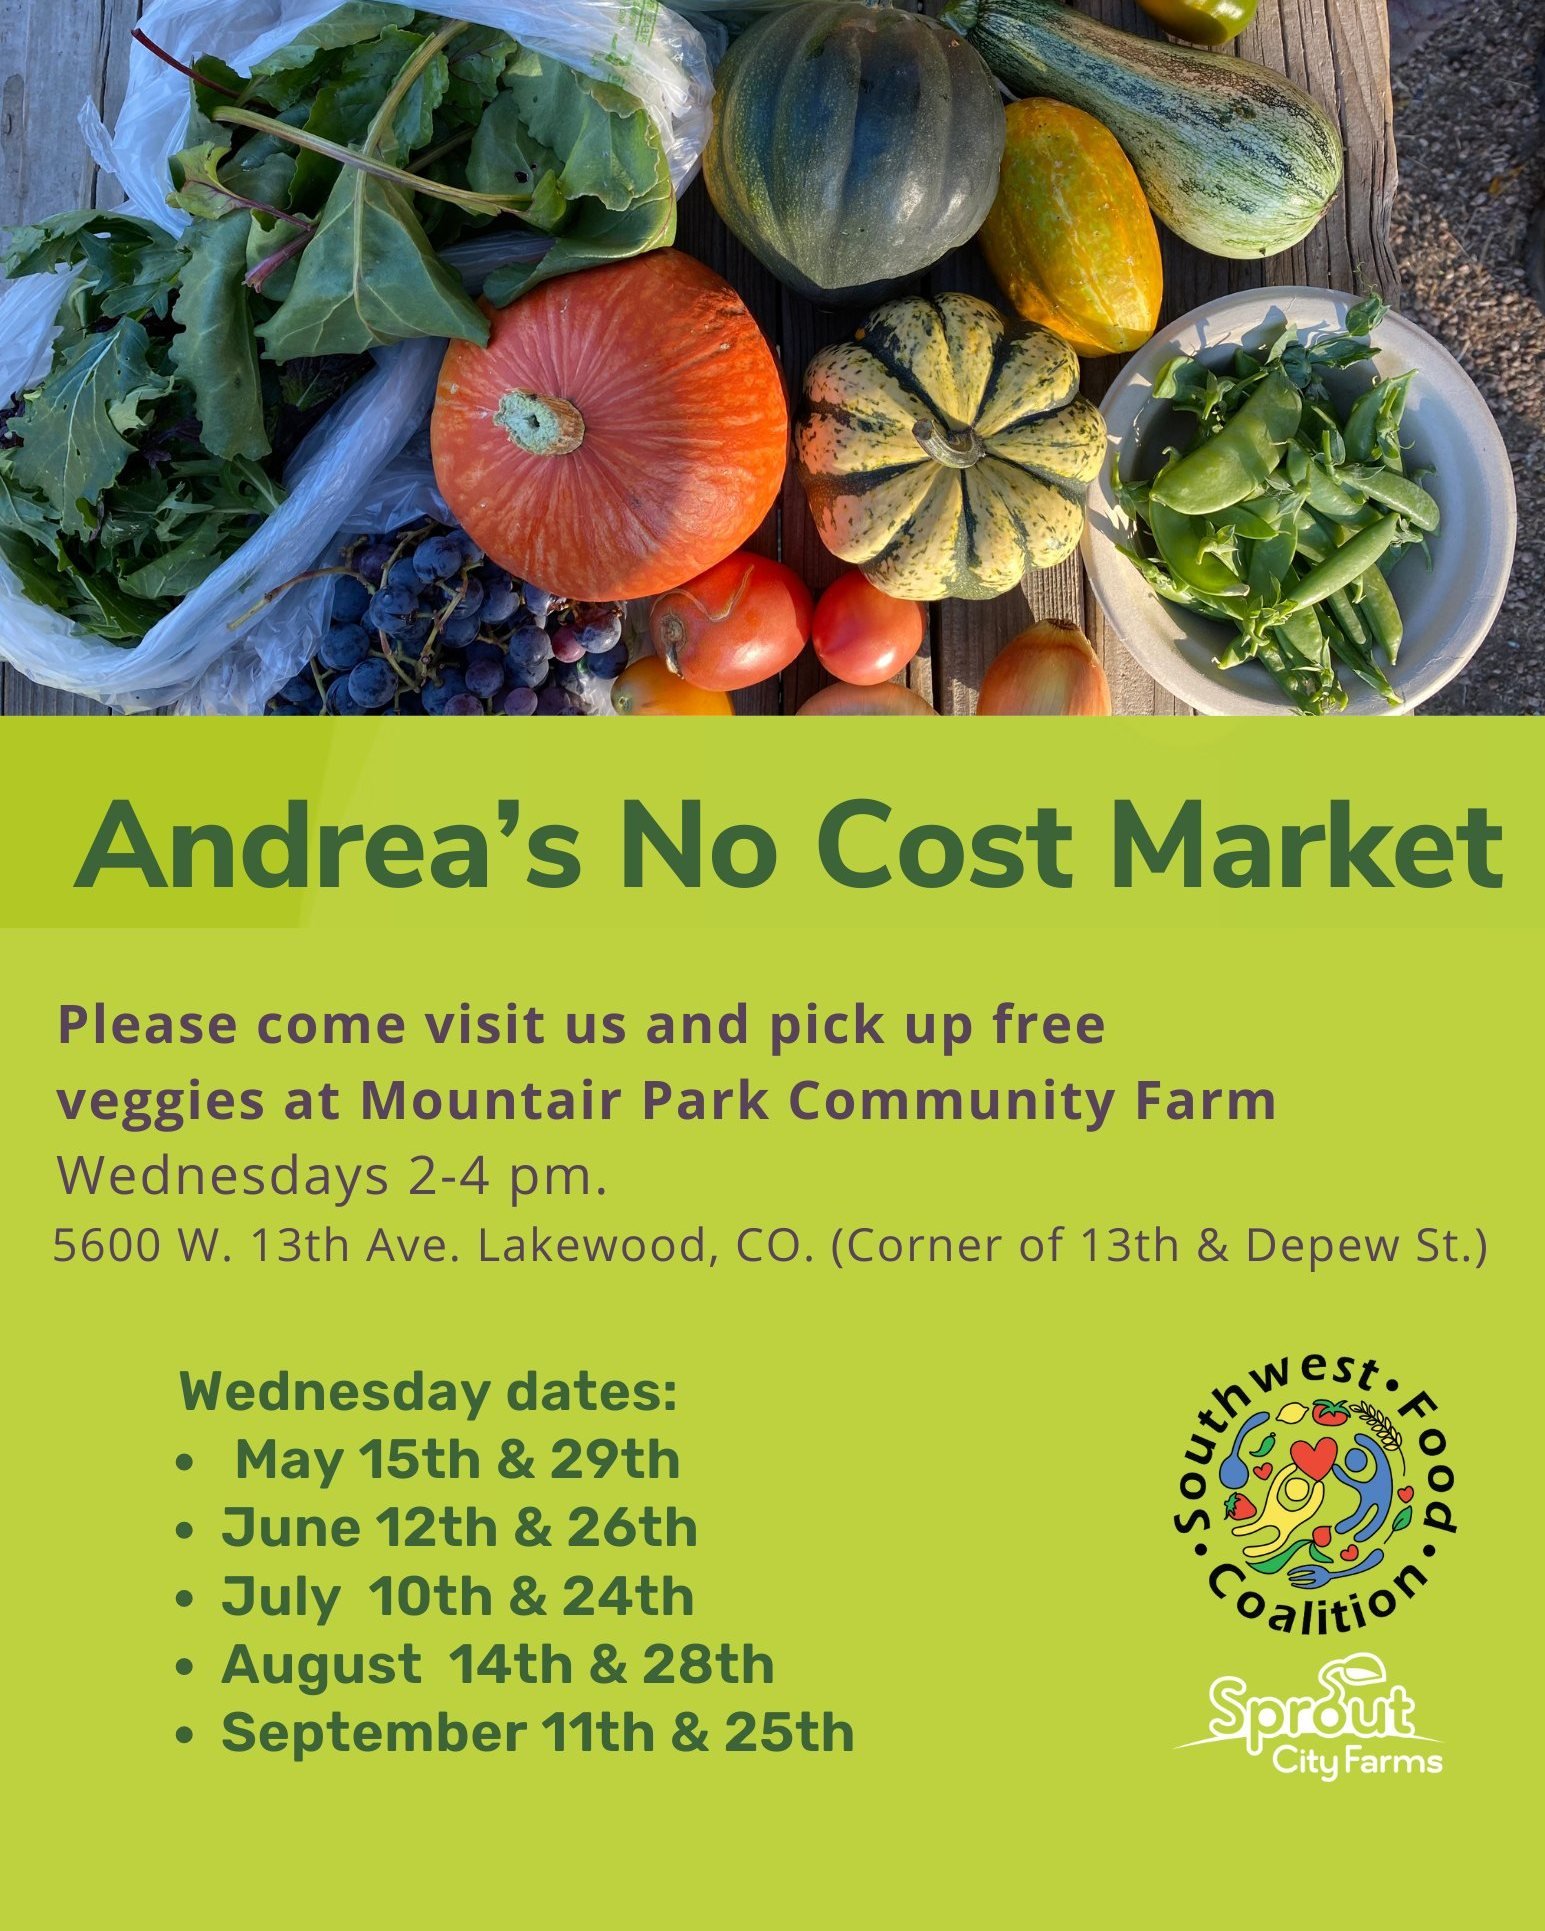 We're so excited to be partnering with @southweest_food_coalition to host Andrea's No Cost Market at Mountair Park Community Farm this season - starting NEXT WEDNESDAY!!! 

As you may have noticed, we haven't been posting too much about Mountair Park